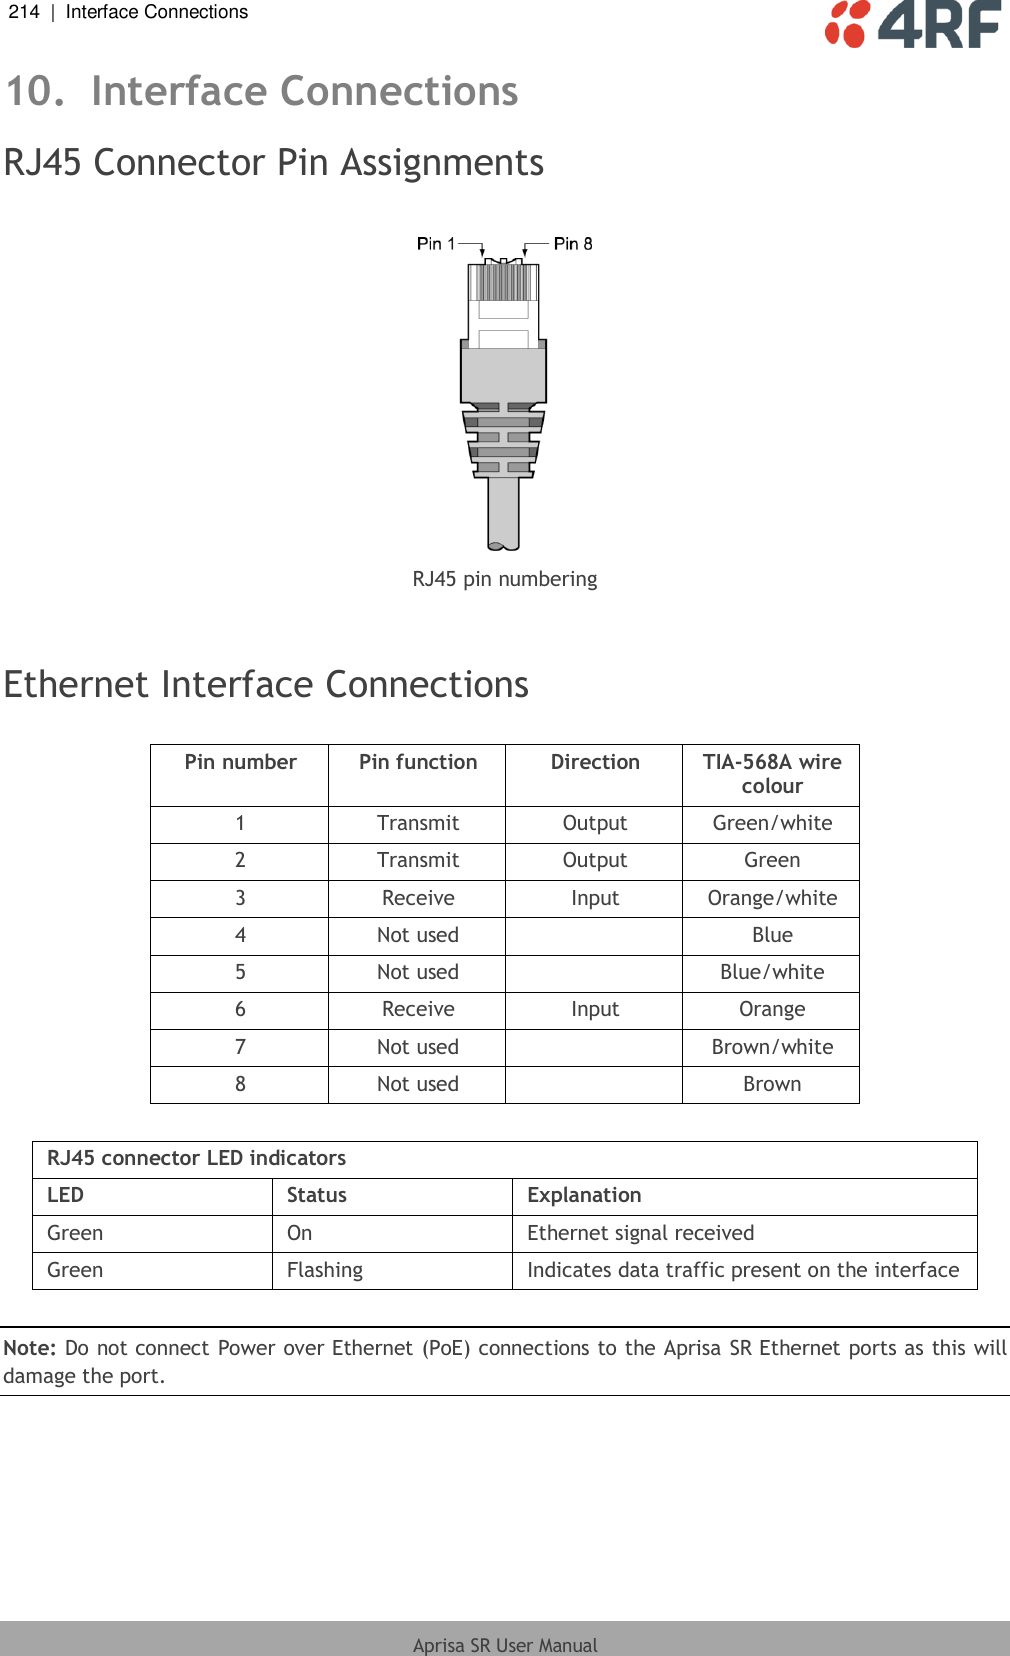 214  |  Interface Connections   Aprisa SR User Manual  10. Interface Connections RJ45 Connector Pin Assignments   RJ45 pin numbering   Ethernet Interface Connections  Pin number Pin function Direction TIA-568A wire colour 1 Transmit Output Green/white 2 Transmit Output Green 3 Receive Input Orange/white 4 Not used  Blue 5 Not used  Blue/white 6 Receive Input Orange 7 Not used  Brown/white 8 Not used  Brown  RJ45 connector LED indicators LED Status Explanation Green On Ethernet signal received Green Flashing Indicates data traffic present on the interface  Note: Do not connect Power over Ethernet (PoE) connections to the Aprisa SR Ethernet ports as this will damage the port. 